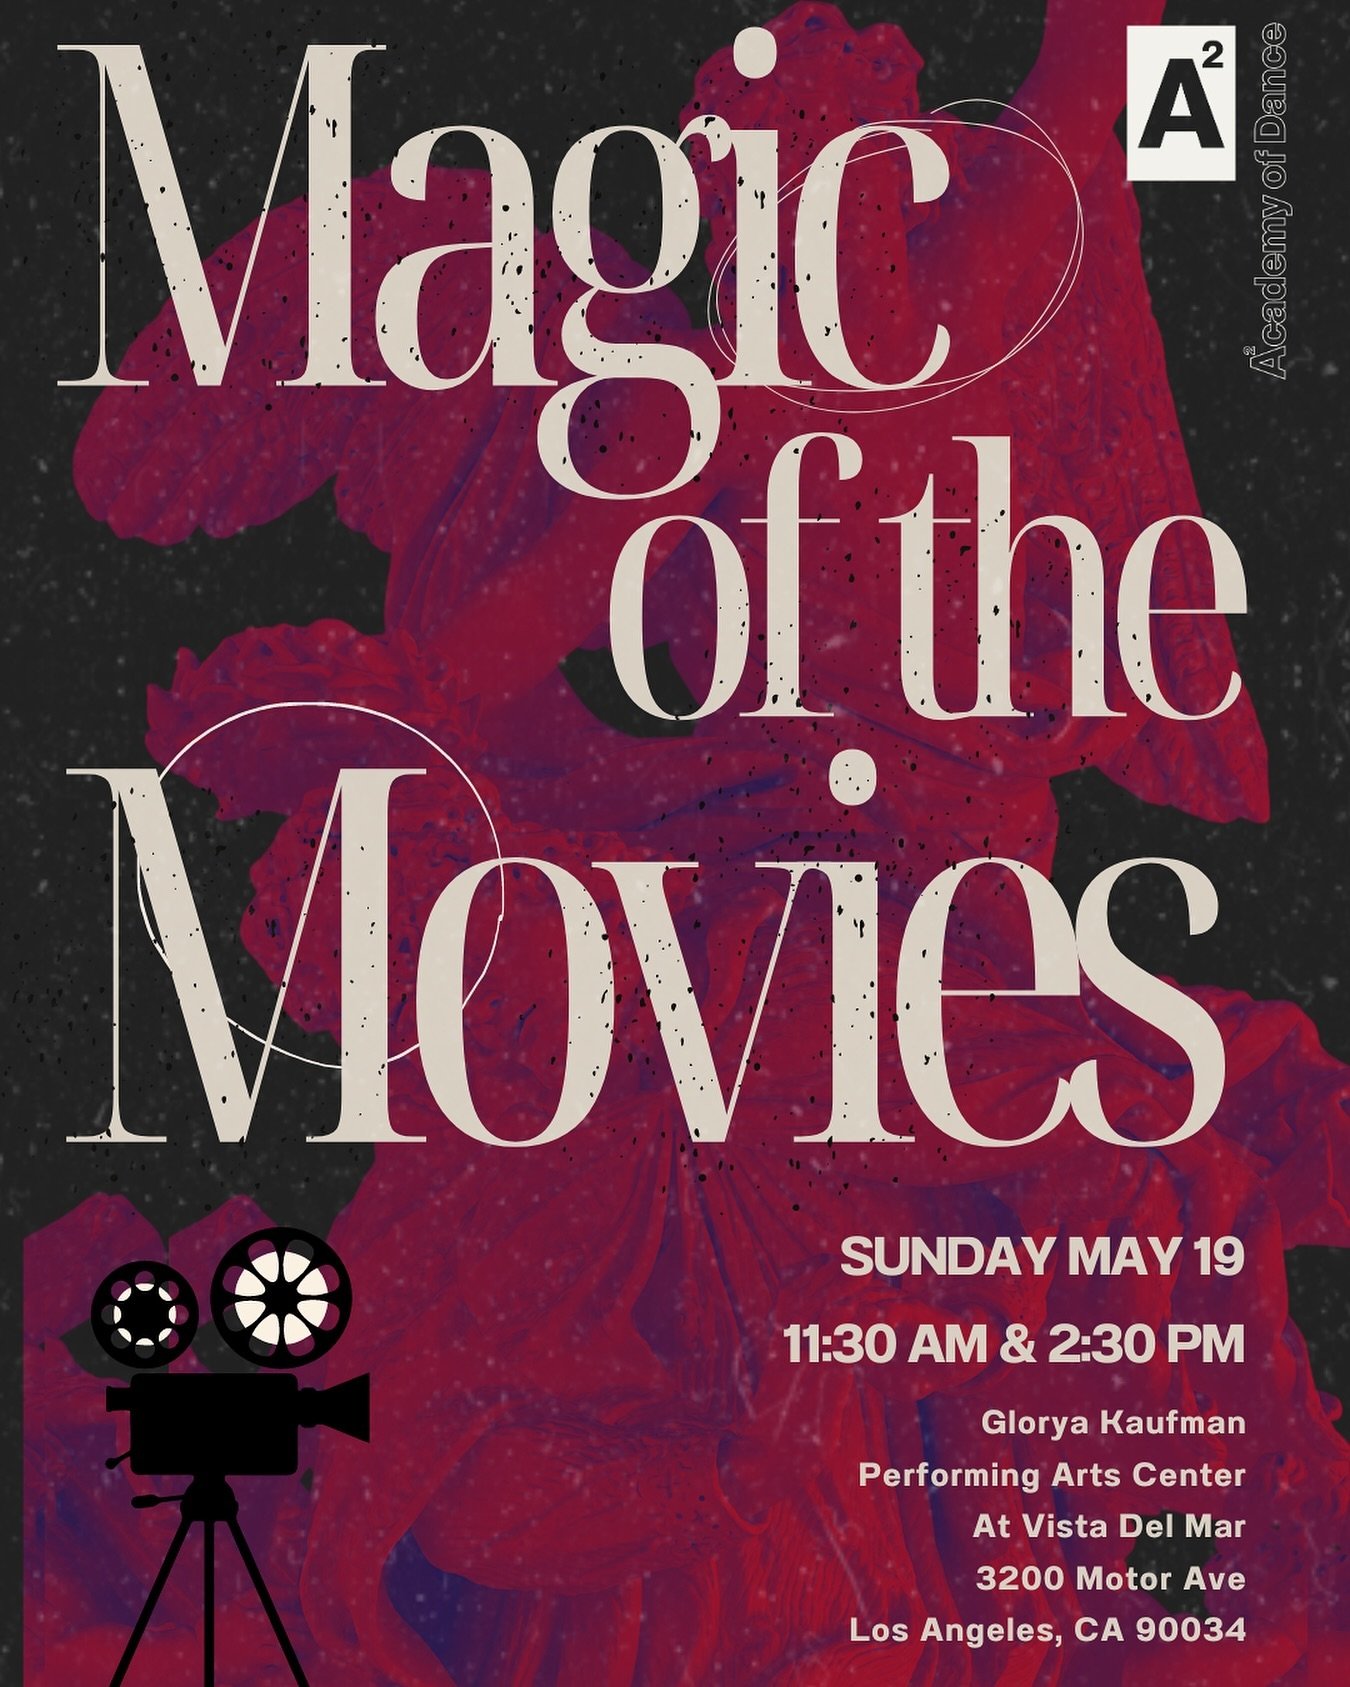 Please join us for our Second Annual Showcase:

✨🎥 MAGIC OF THE MOVIES 🎥✨ 

We&rsquo;re so excited to show you what we&rsquo;ve been working on this year! 

Sunday, May 19th 
At 11:30 AM &amp; 2:30 PM 
Glorya Kaufman Performing Arts Center 
at Vist